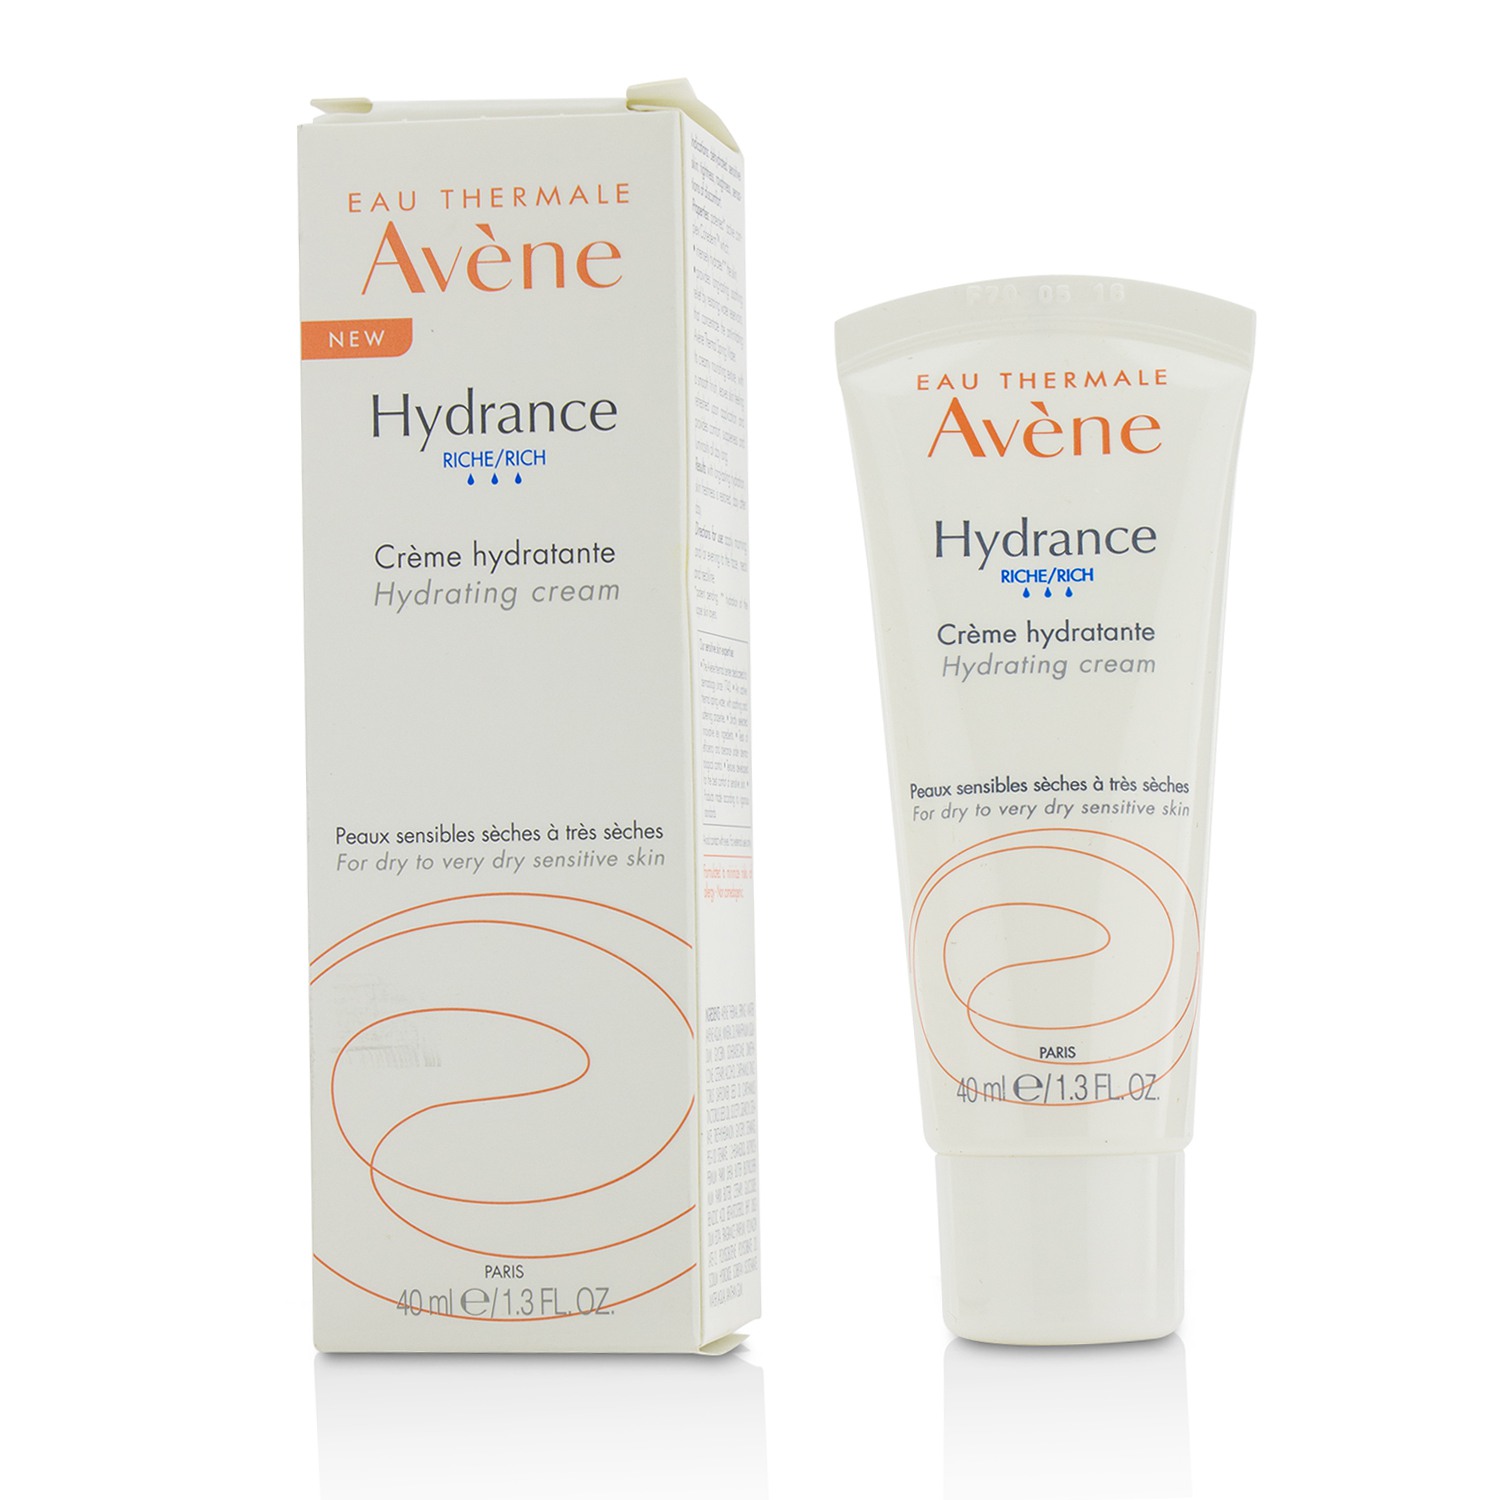 Hydrance Rich Hydrating Cream - For Dry to Very Dry Sensitive Skin Avene Image